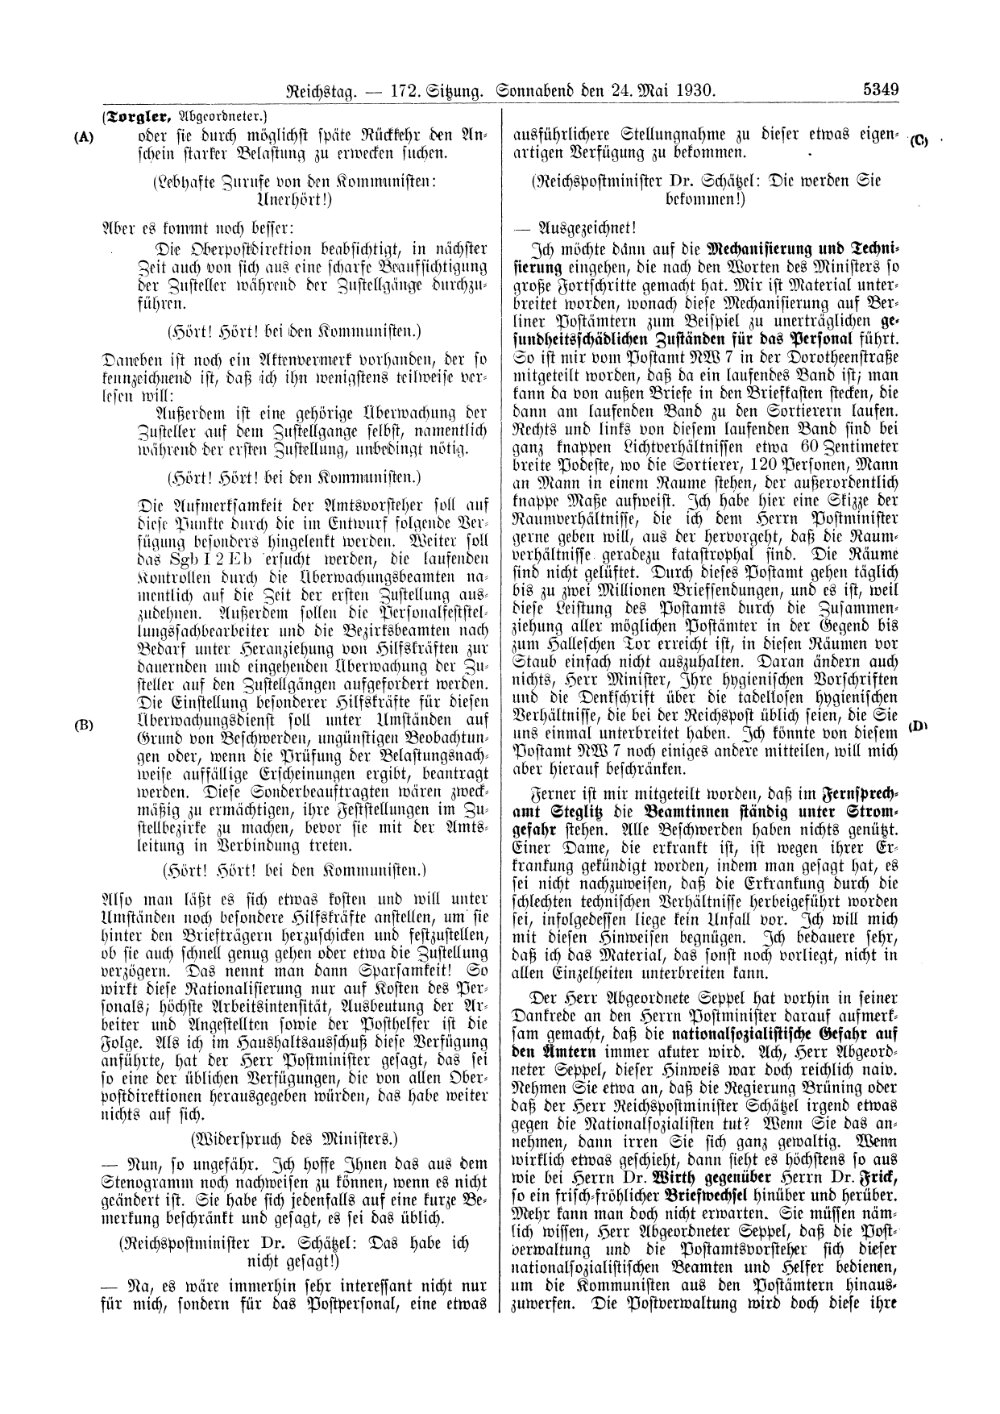 Scan of page 5349